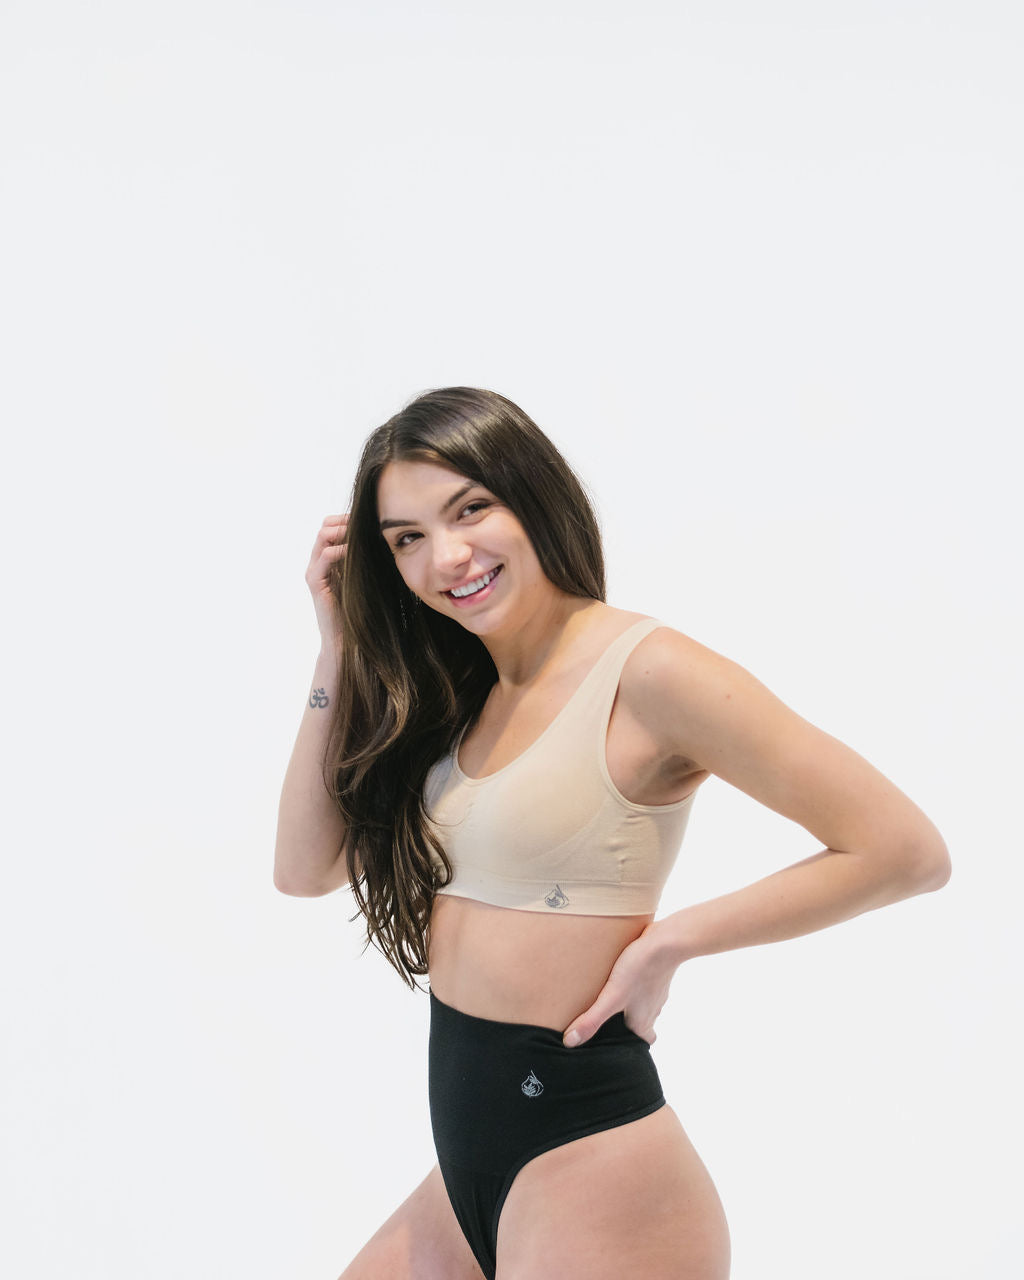 Bamboo Underwear: Everything You Need to Know - Cliché Magazine